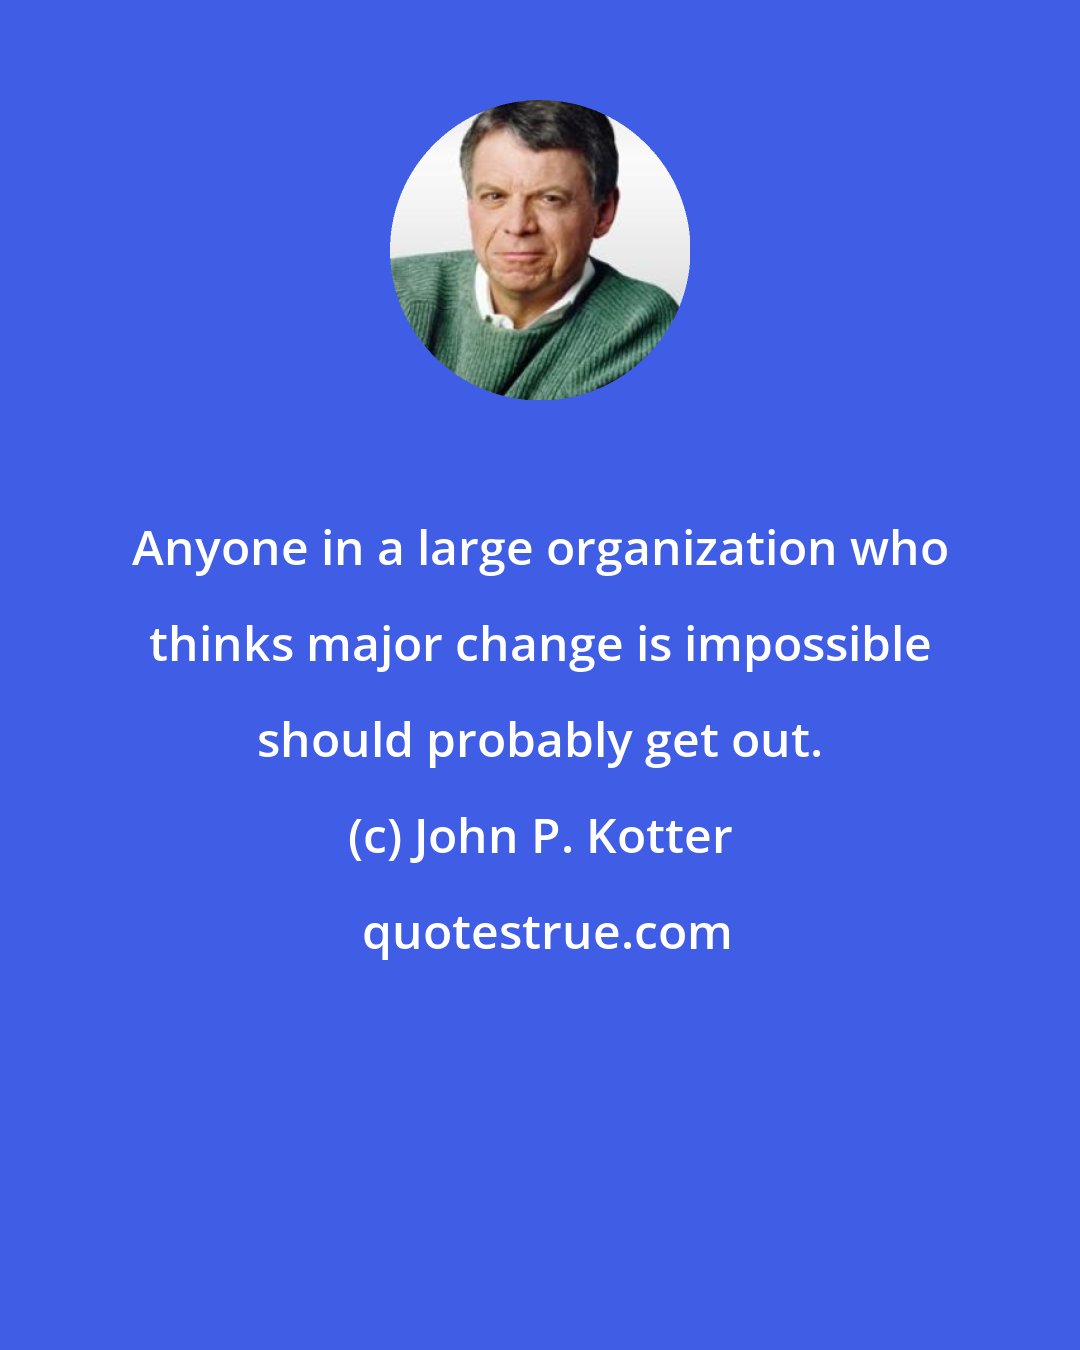 John P. Kotter: Anyone in a large organization who thinks major change is impossible should probably get out.